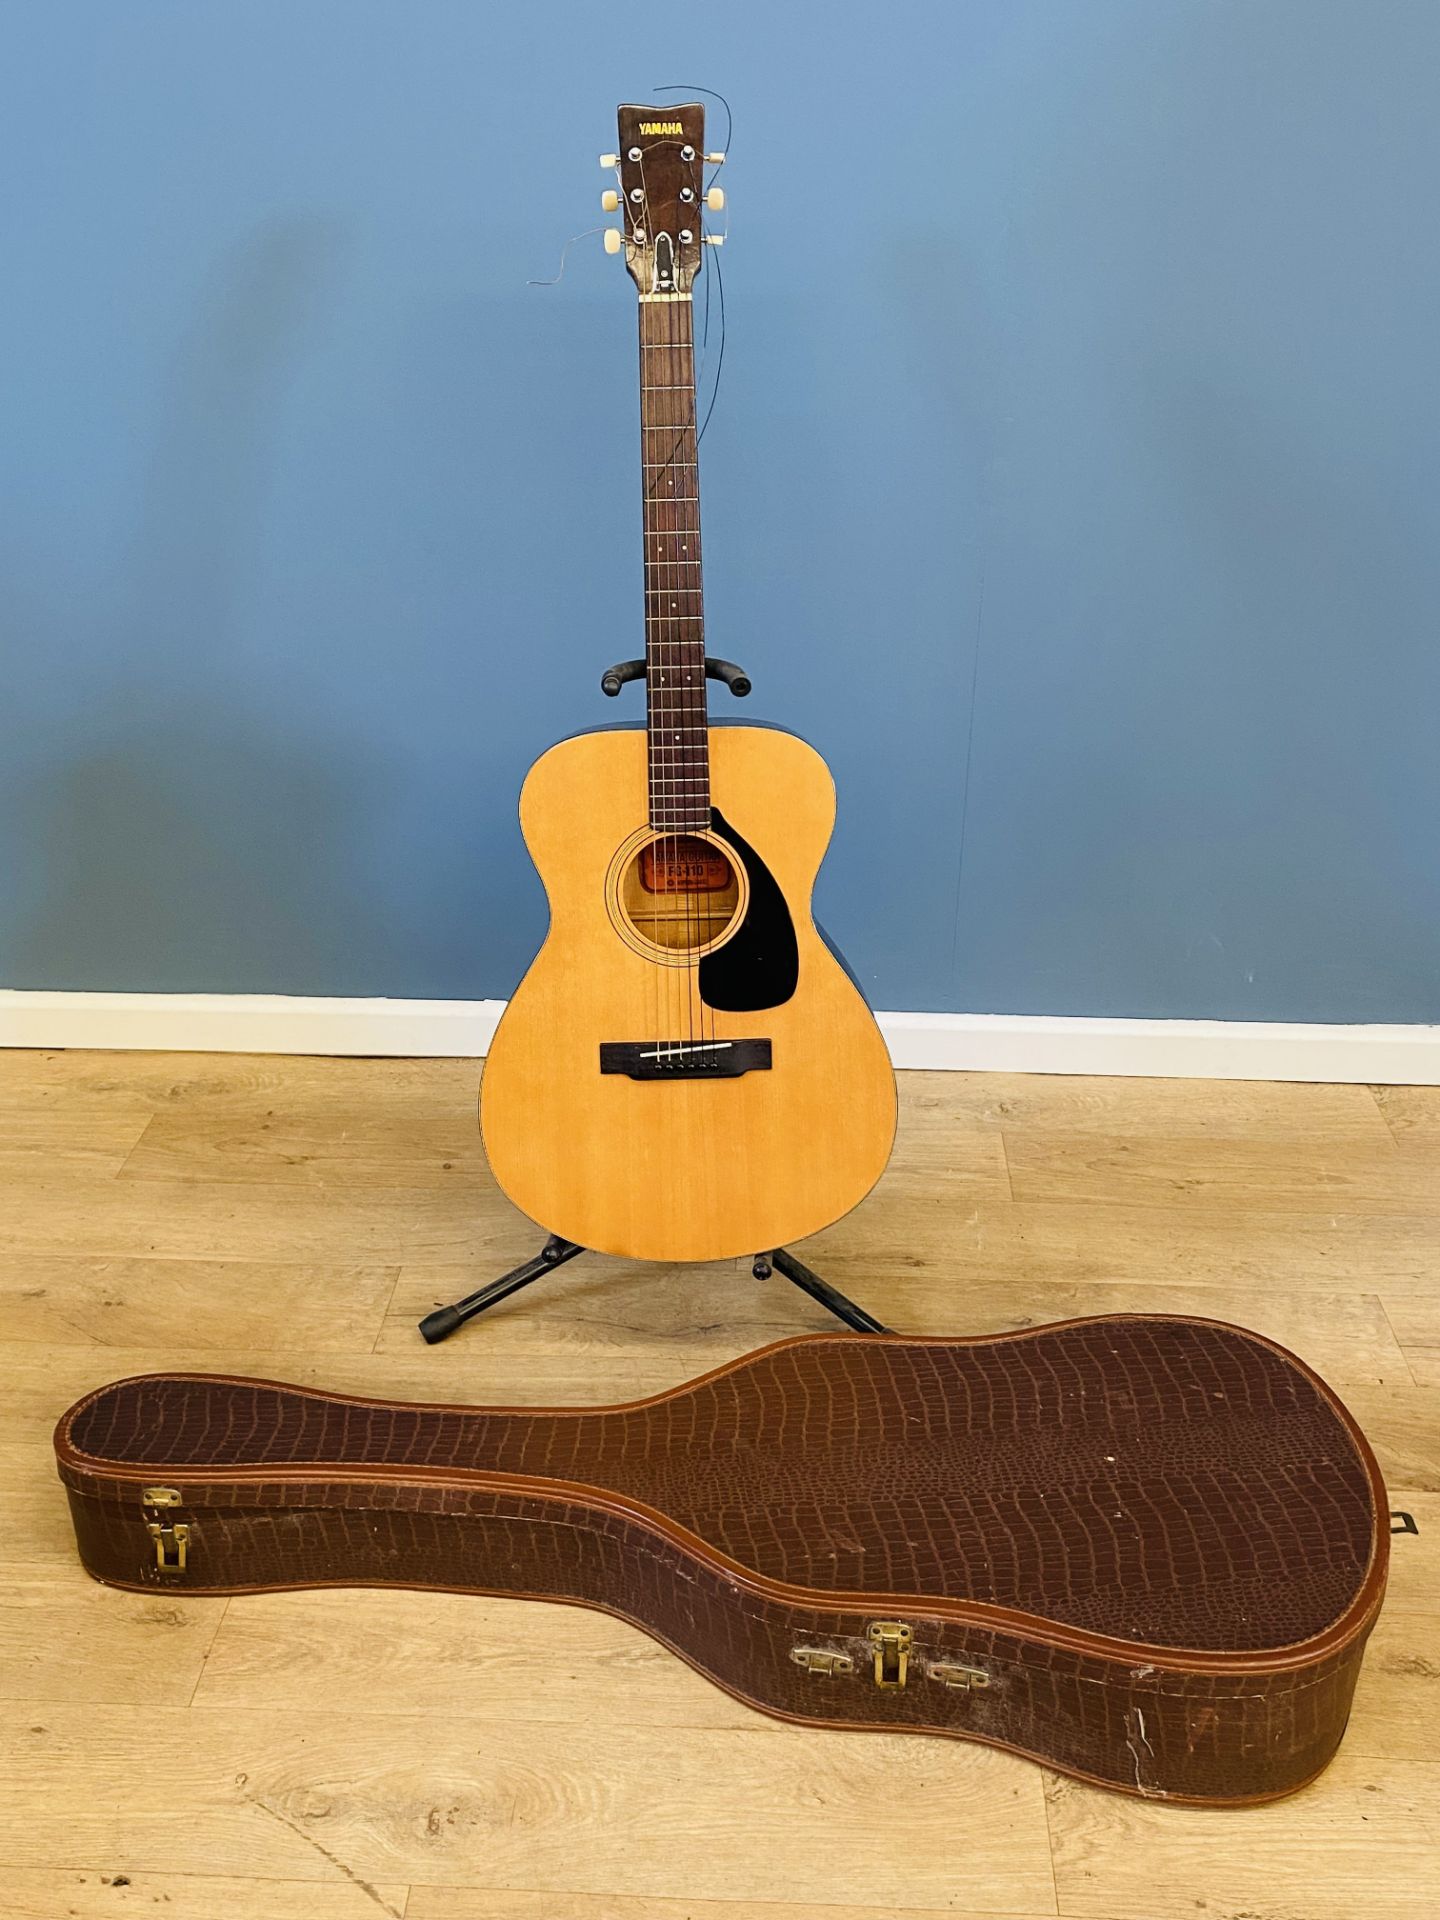 Yamaha FG-10 acoustic guitar in case